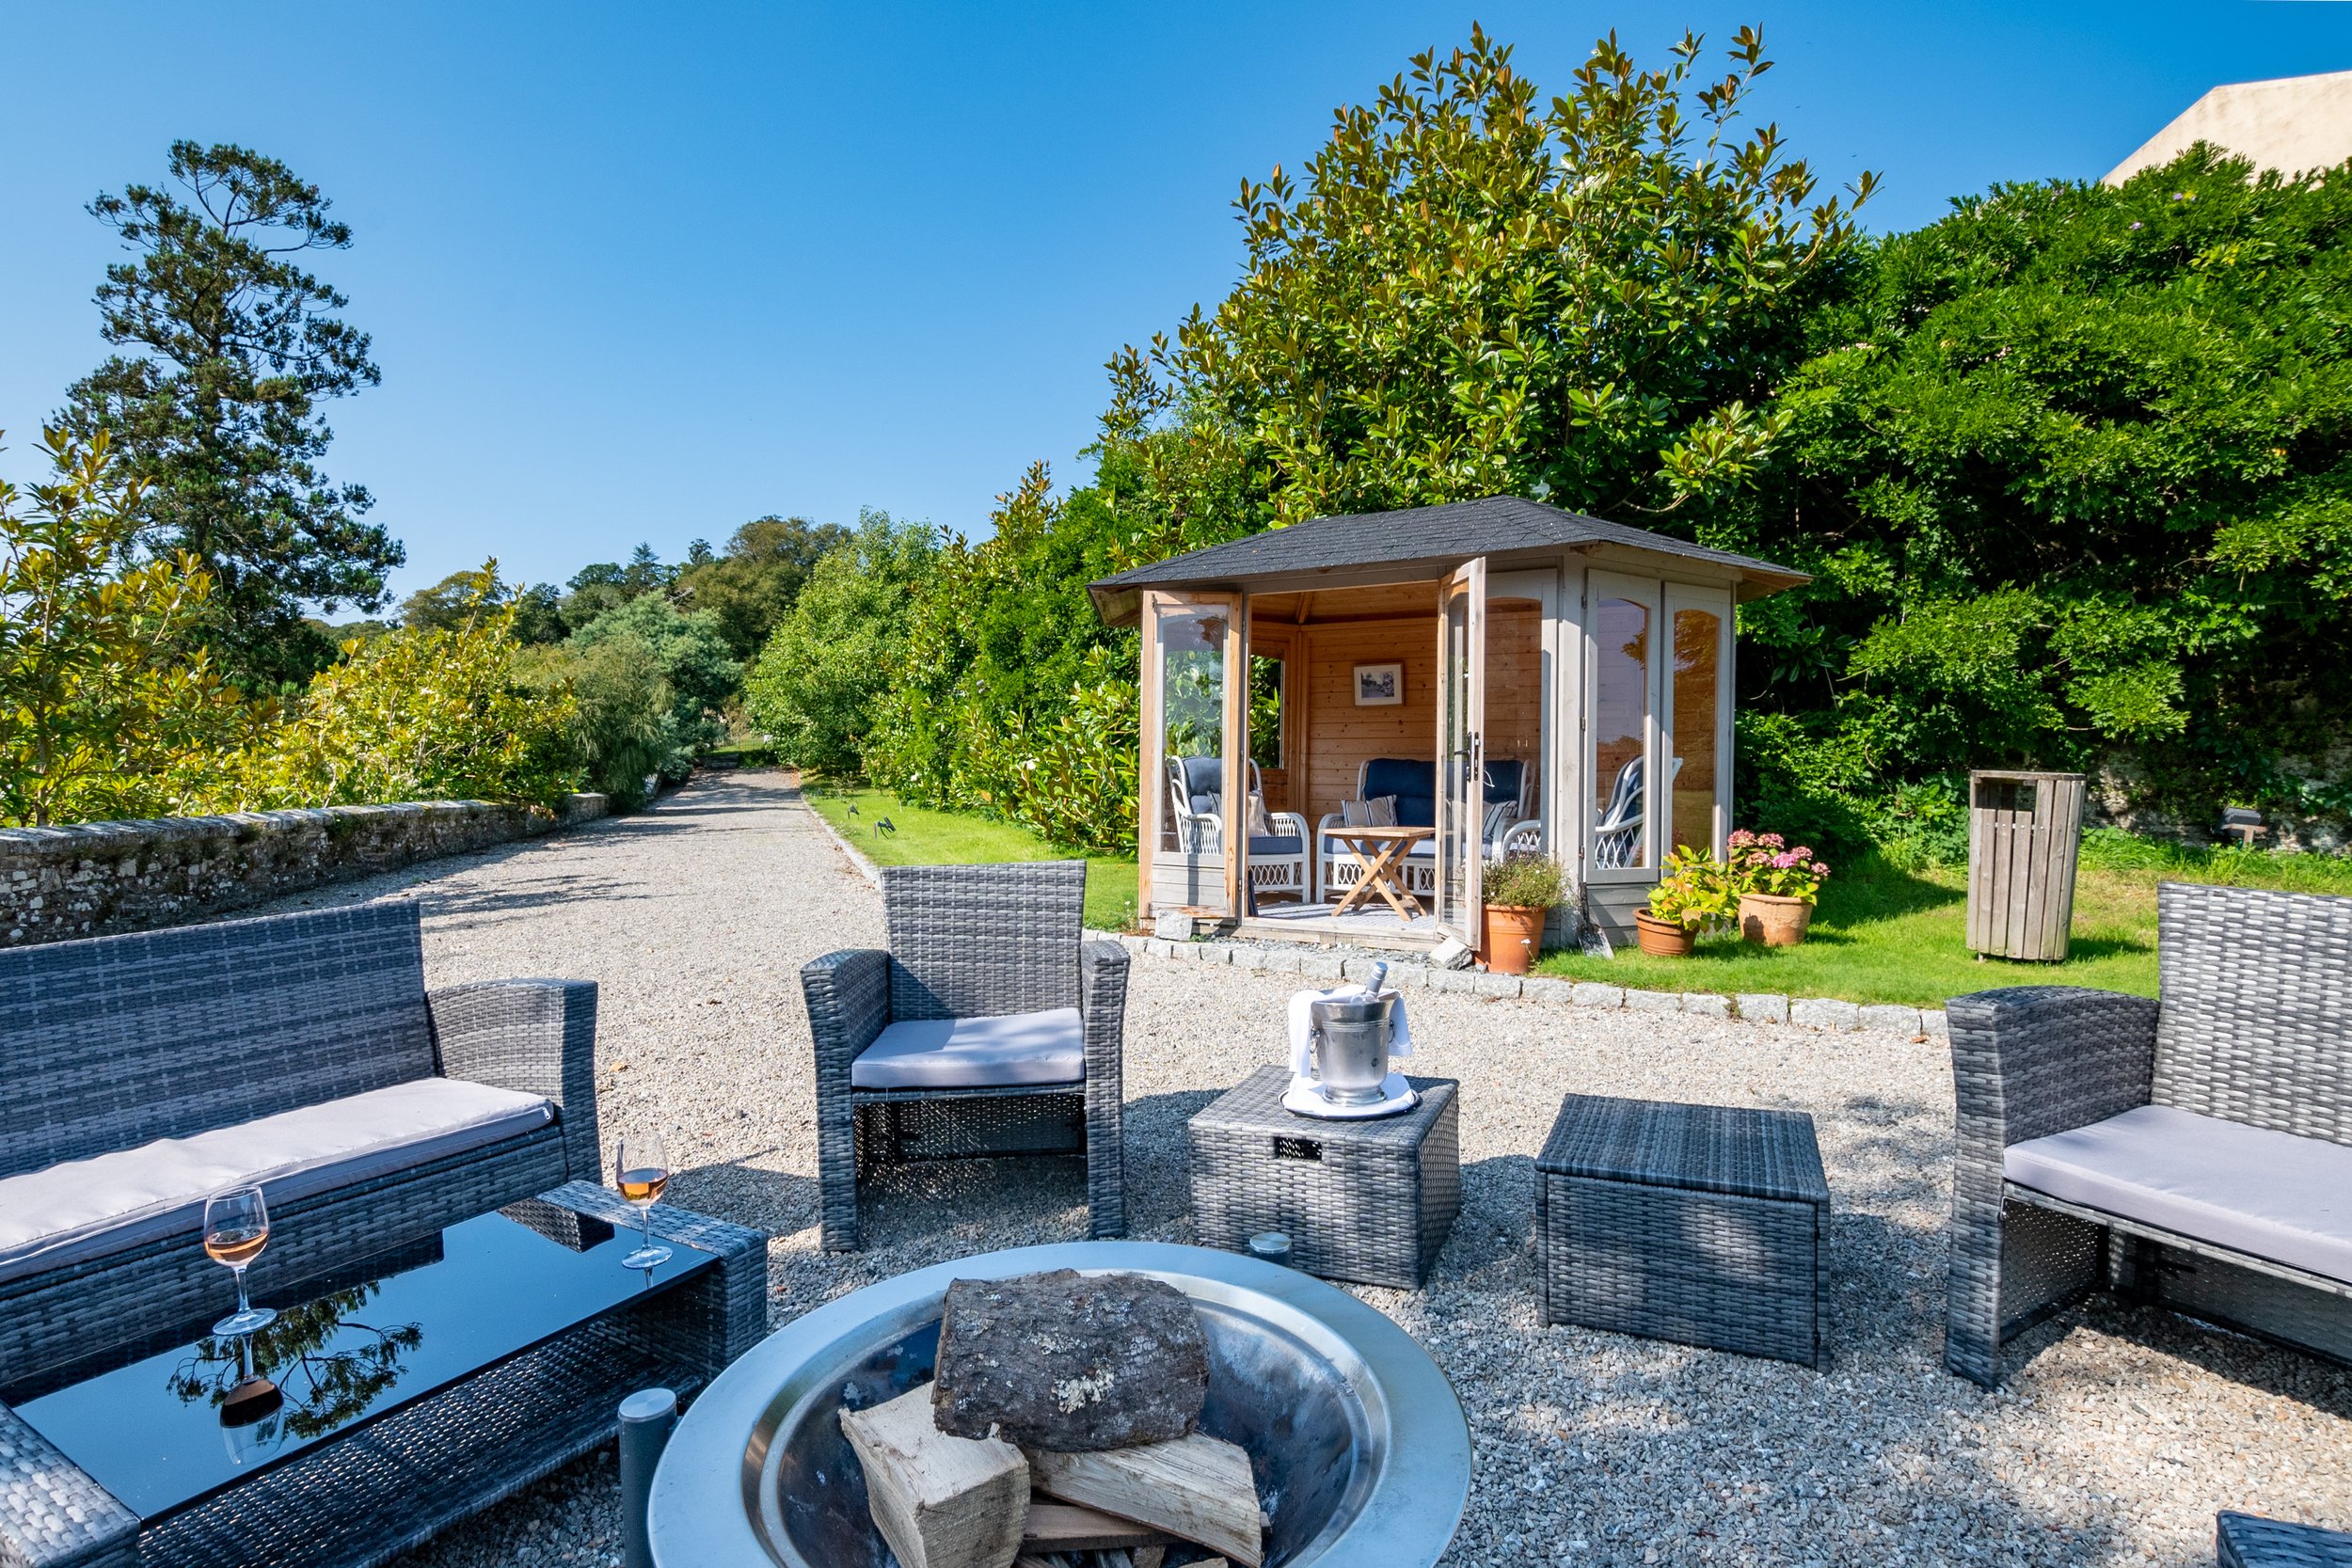 10_Summer House & Fire Pit on the Terraces at Pentillie Castle by Grey Dog Images.jpg